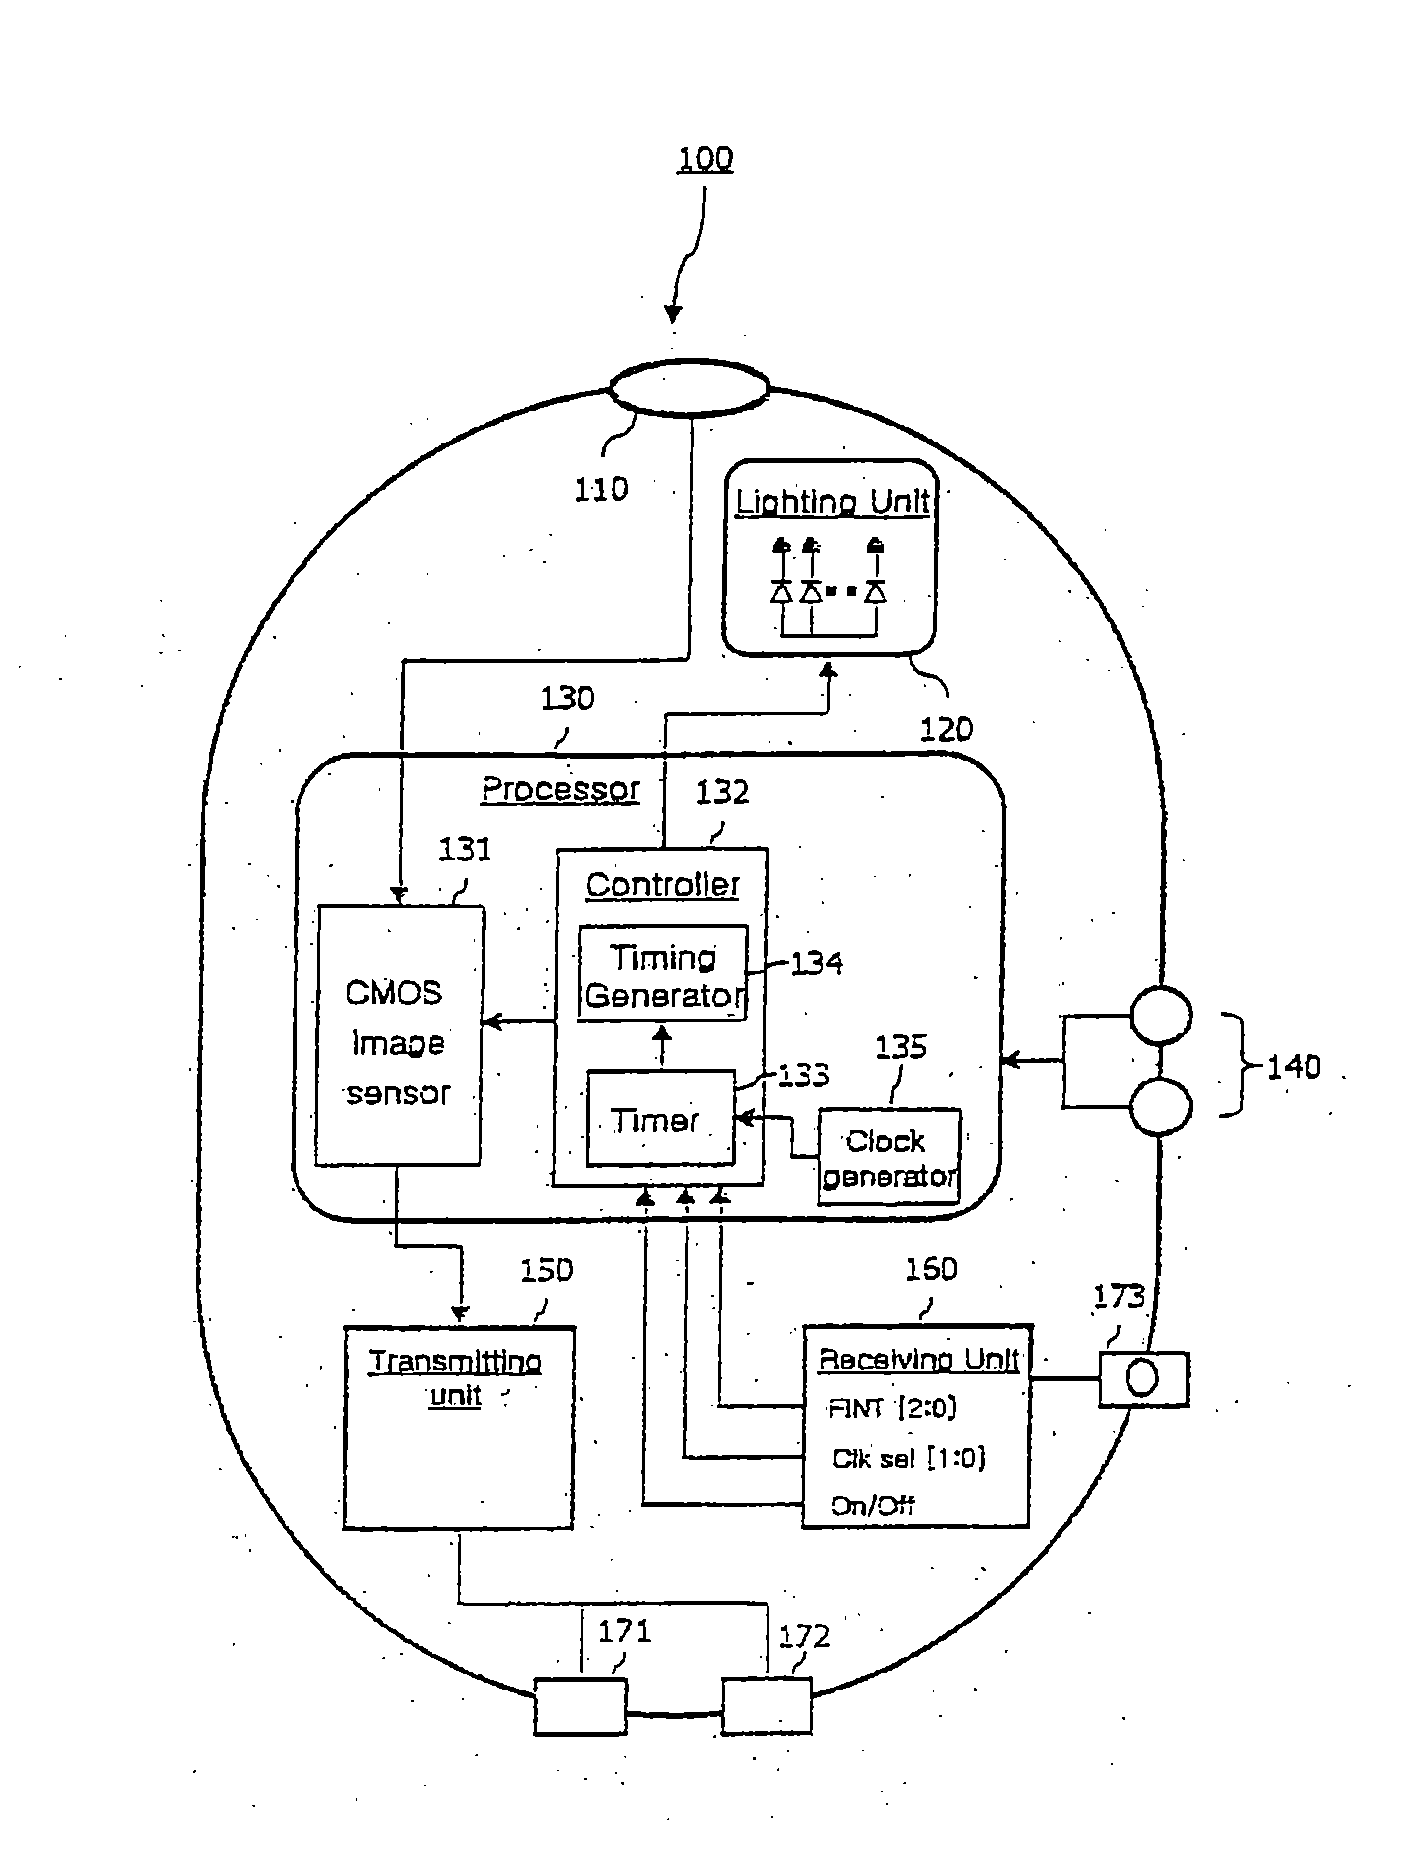 Capsule-type endoscope capable of controlling frame rate of image